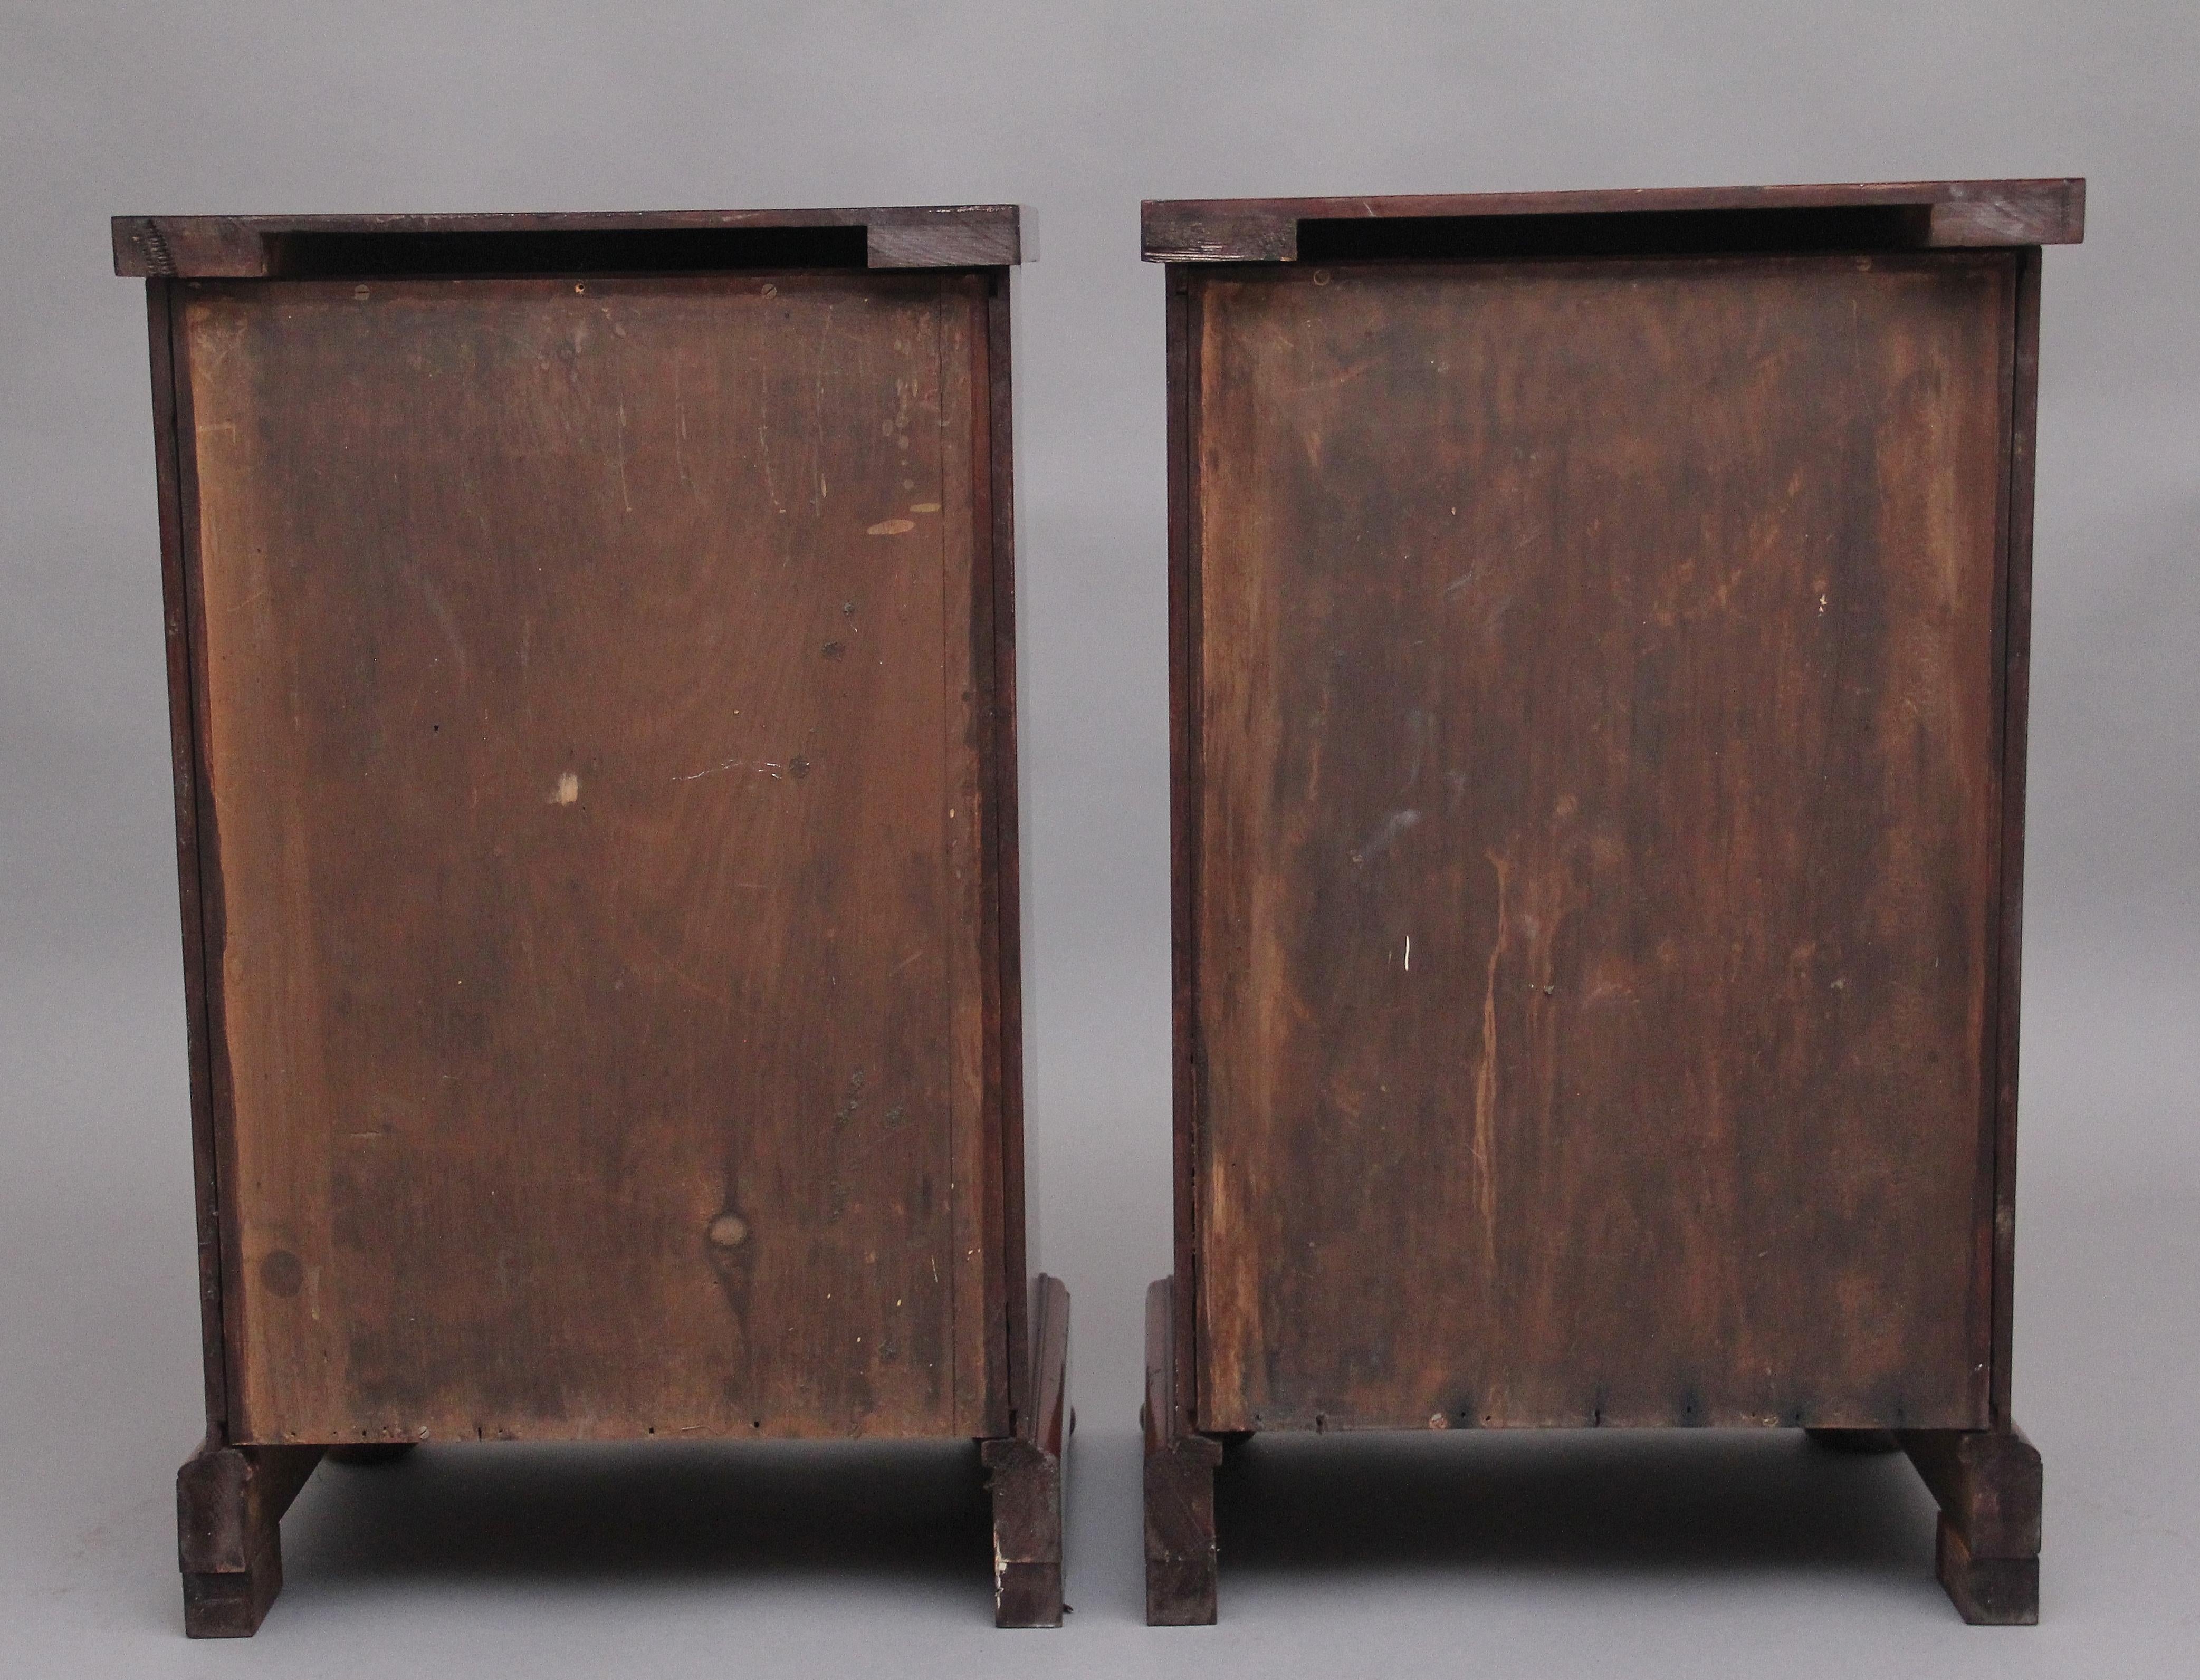 Pair of 19th Century Flame Mahogany Bedside Cabinets In Good Condition For Sale In Martlesham, GB